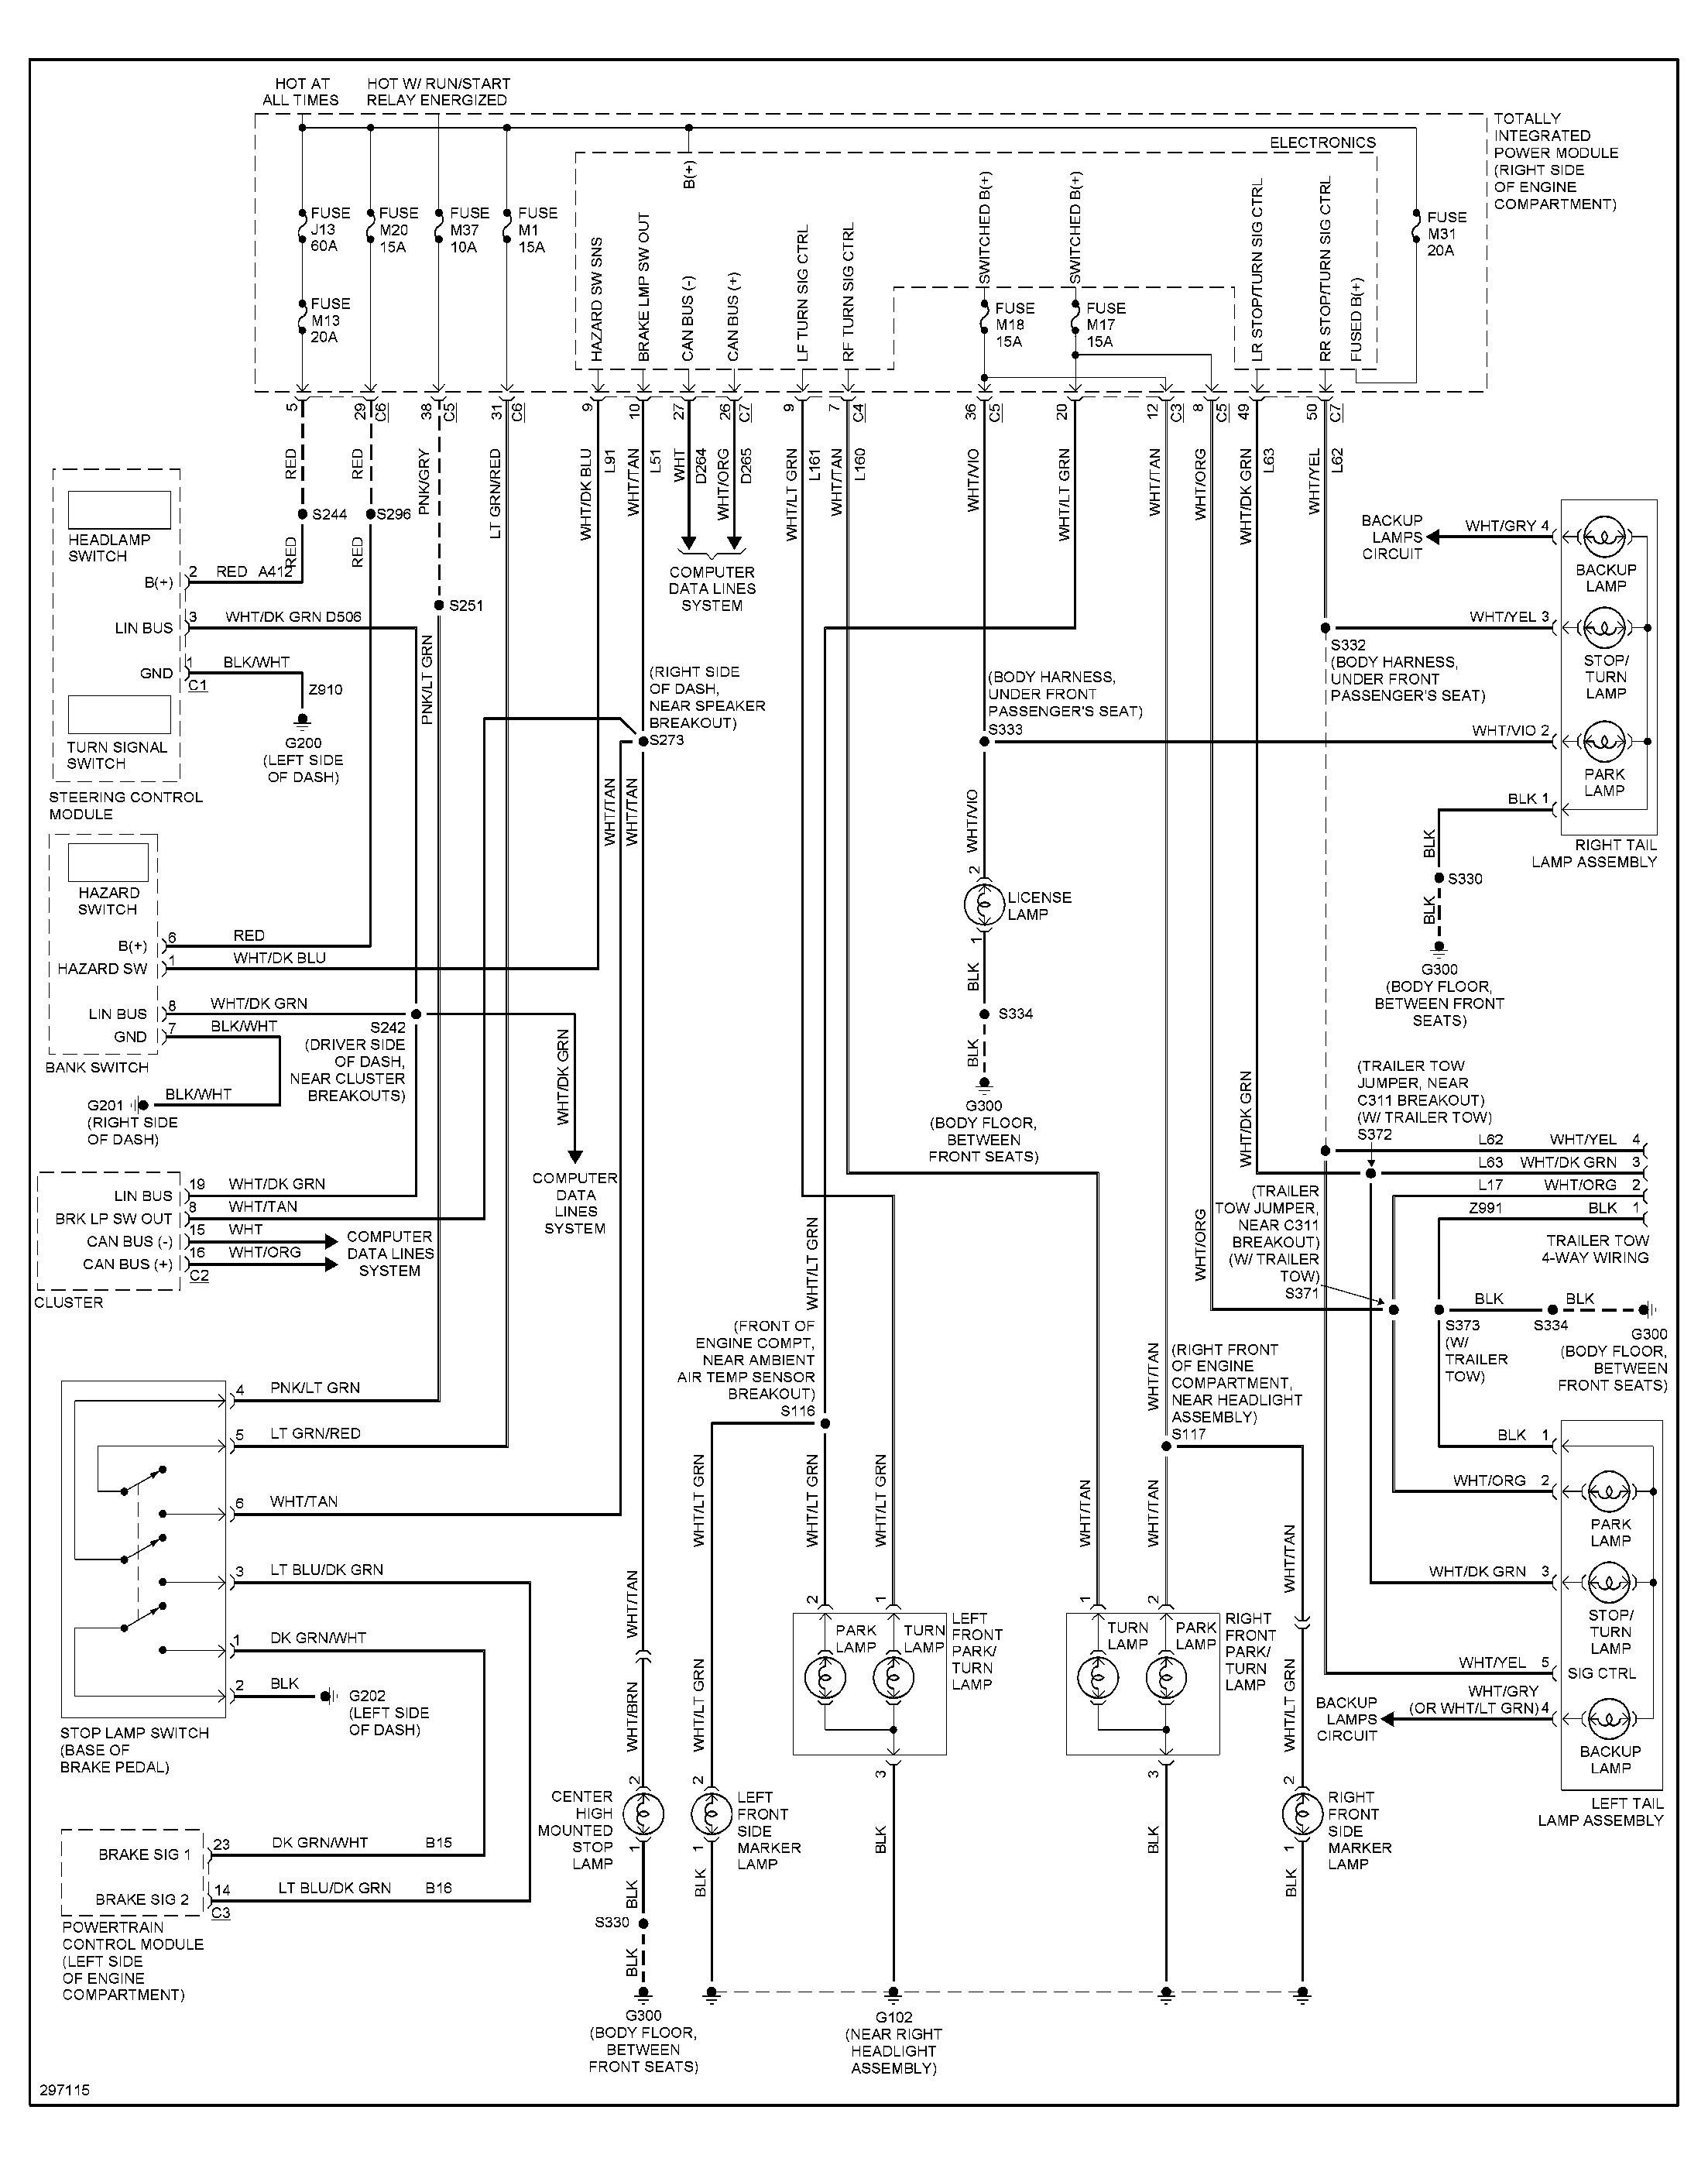 Wiring Diagram 1995 Jeep Wrangler from mainetreasurechest.com